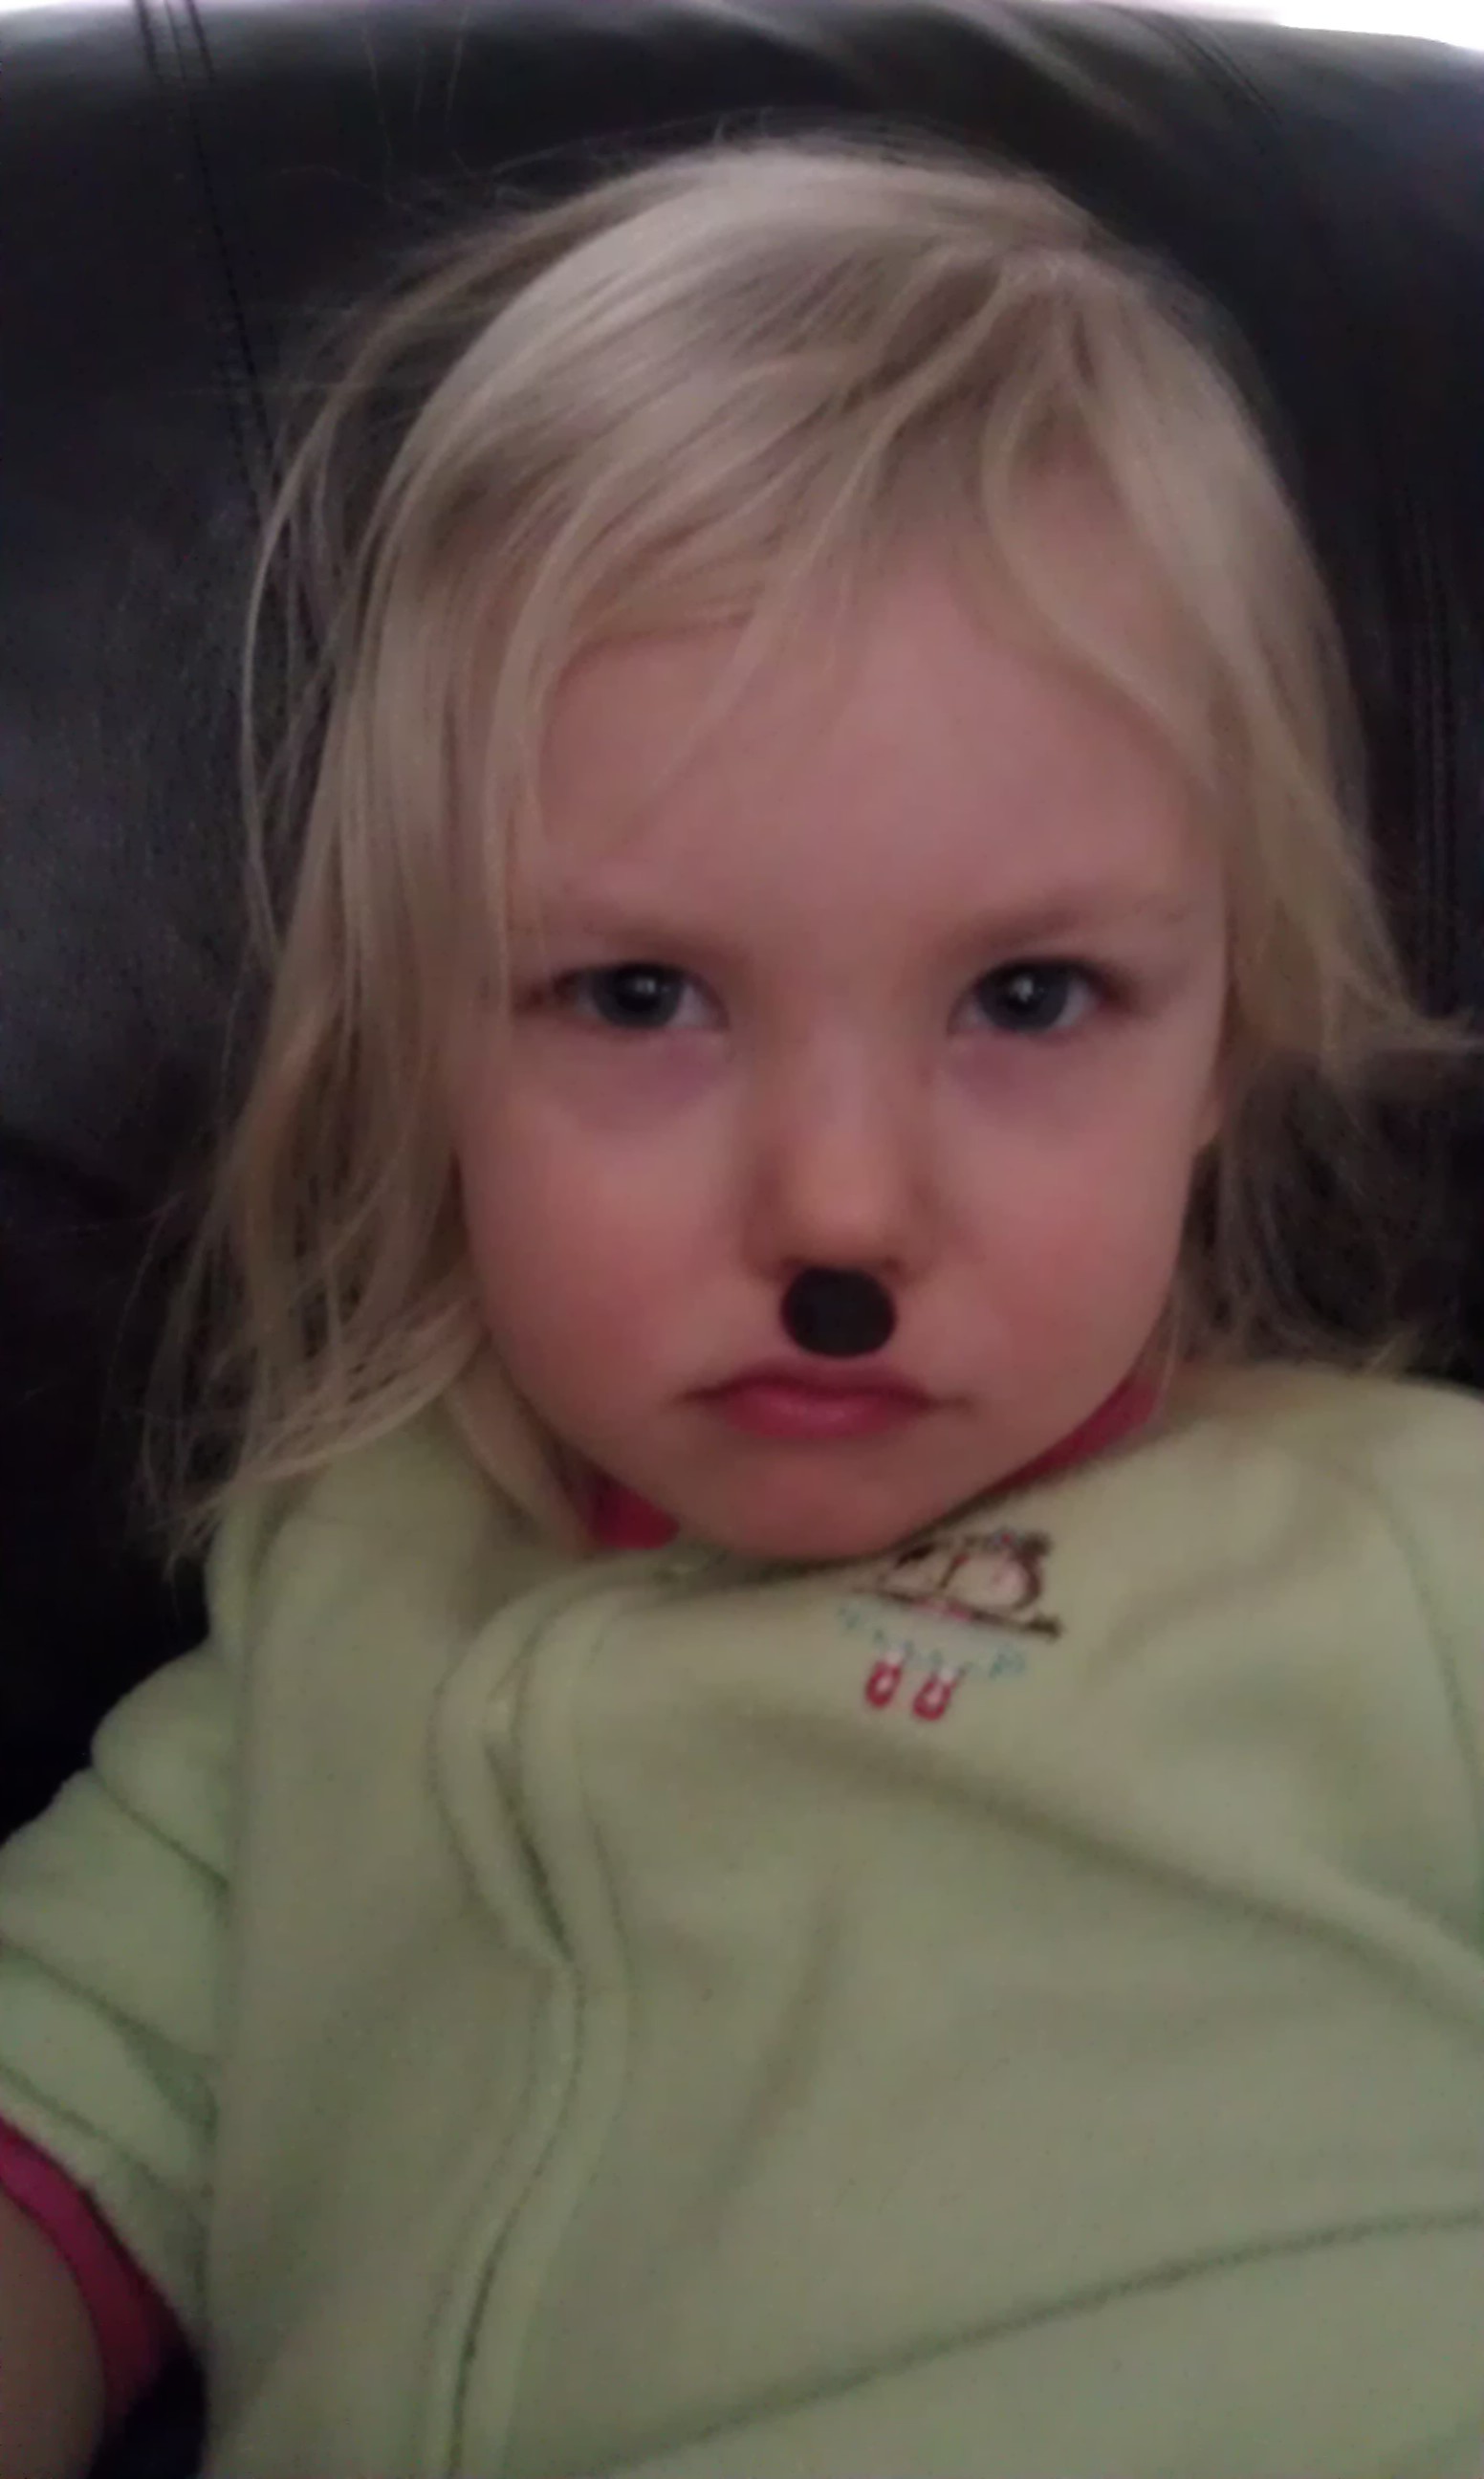 This girl is playing with raisins and looks like hitler.